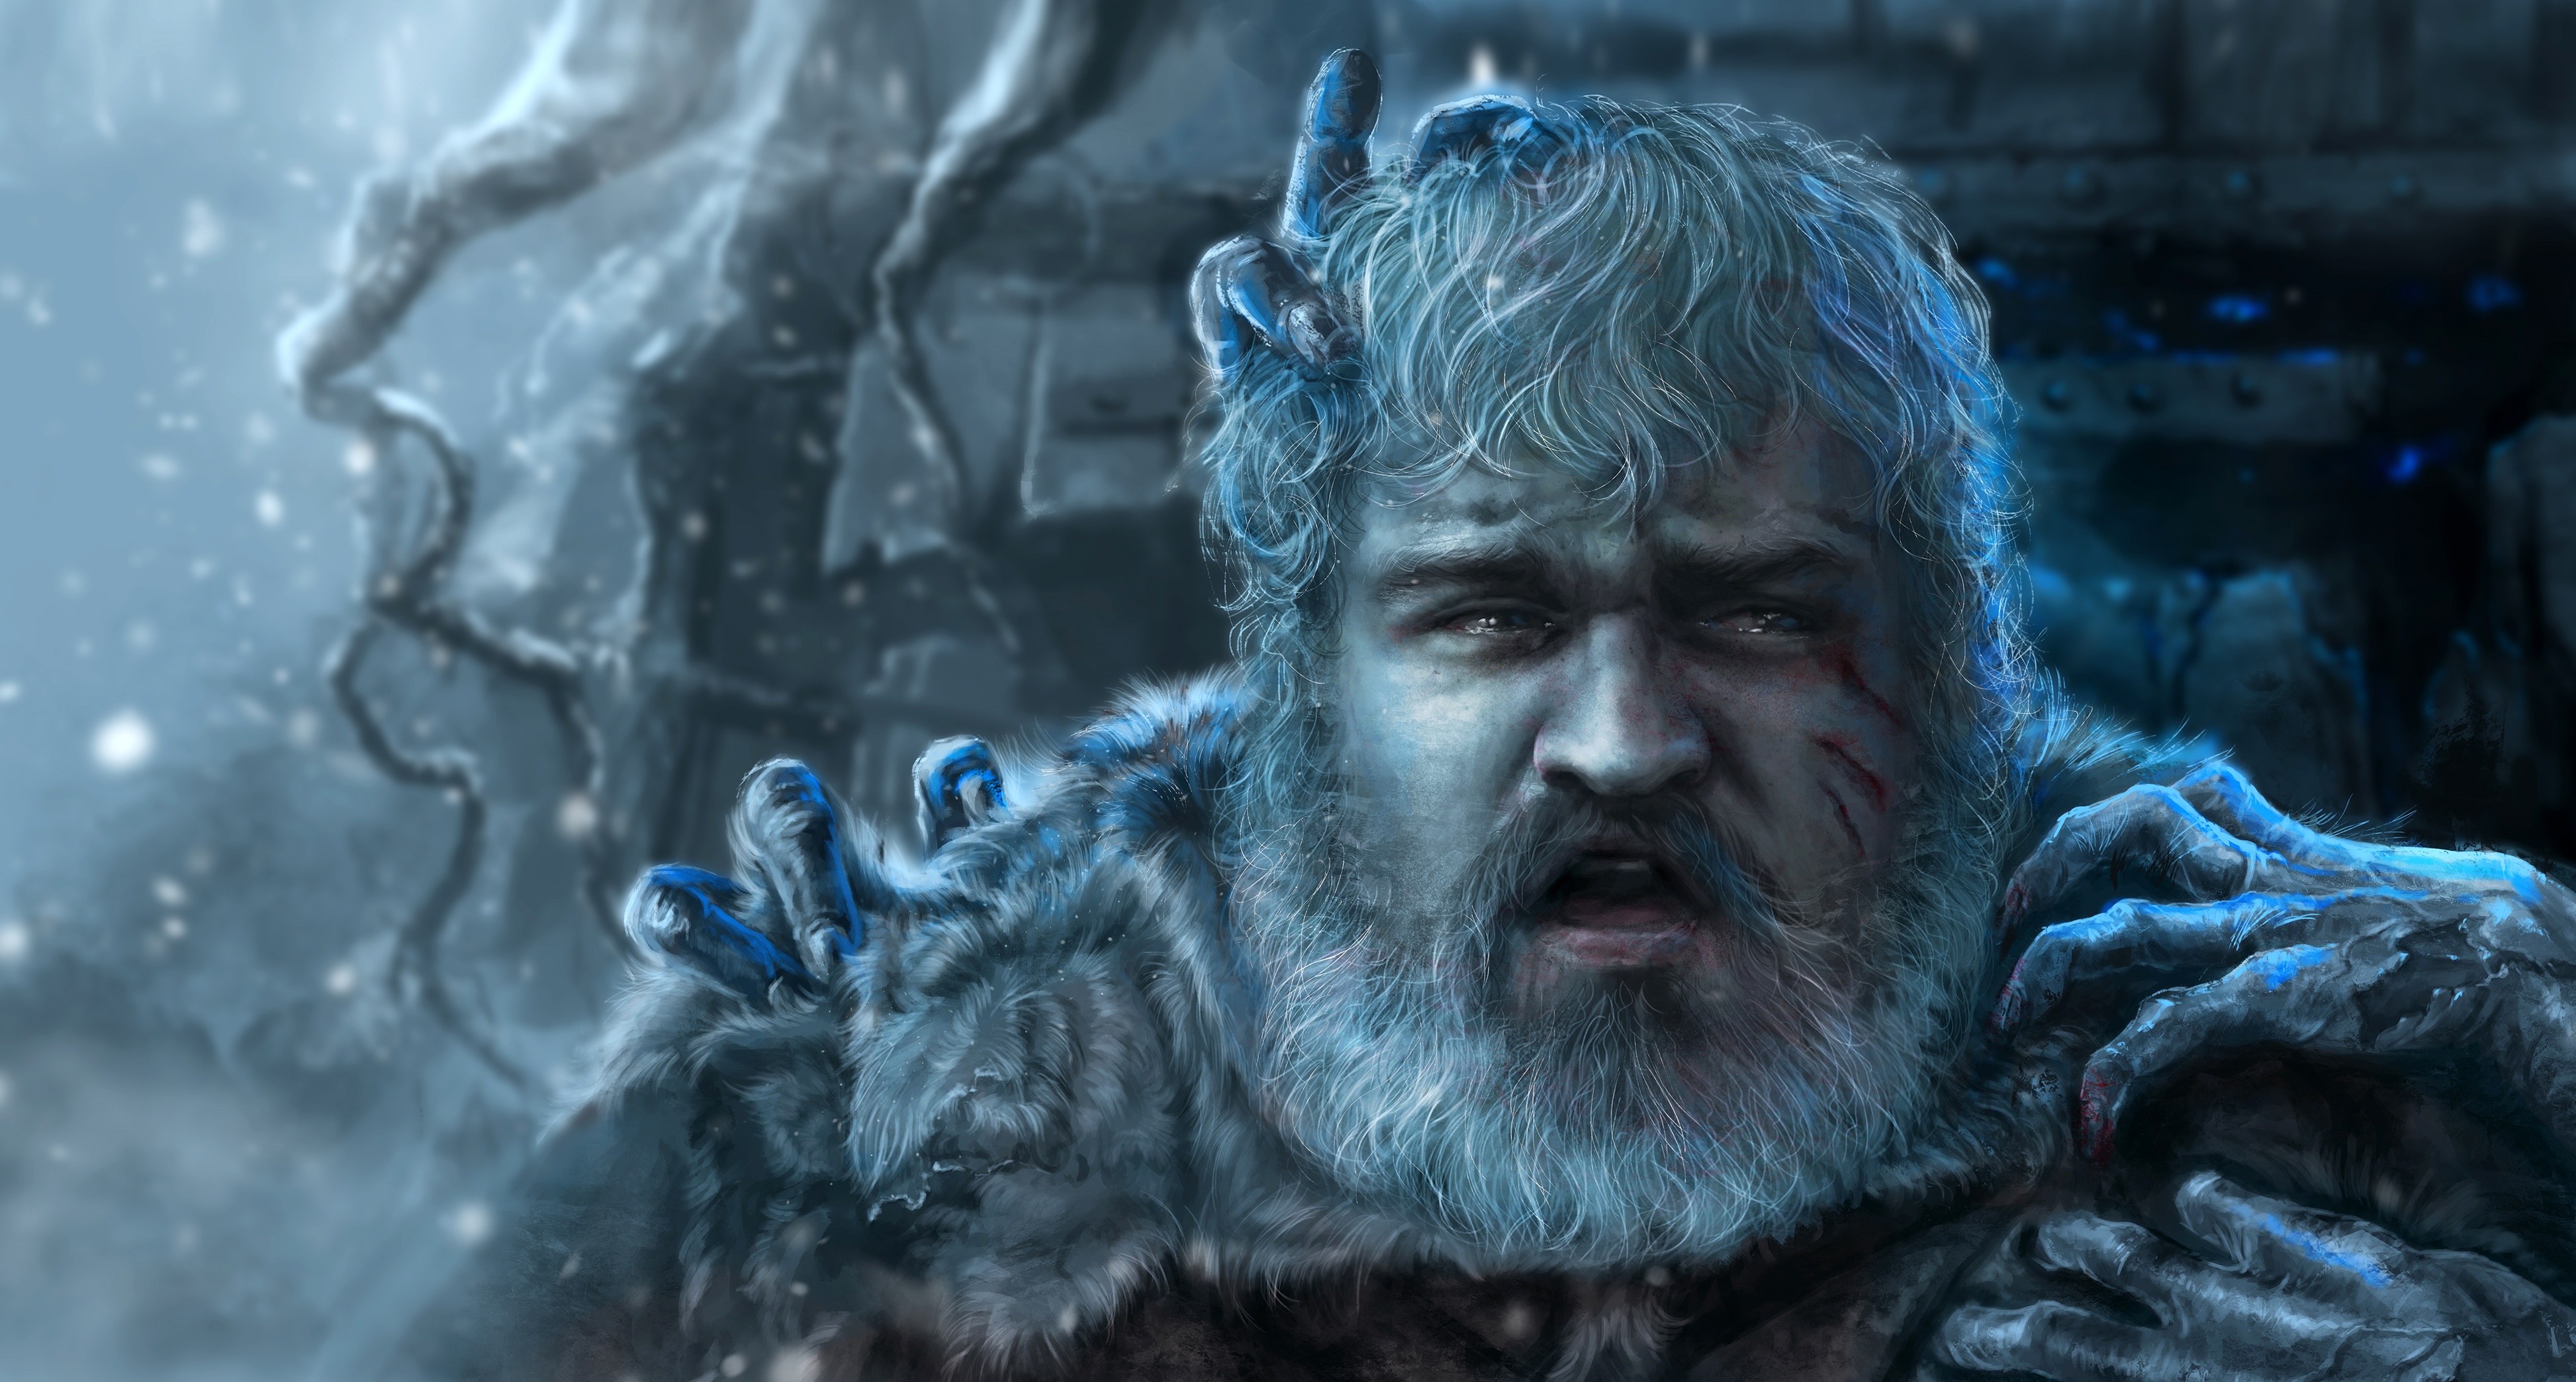 A Song Of Ice And Fire Game Of Thrones Hodor Game Of Thrones 3892x2088